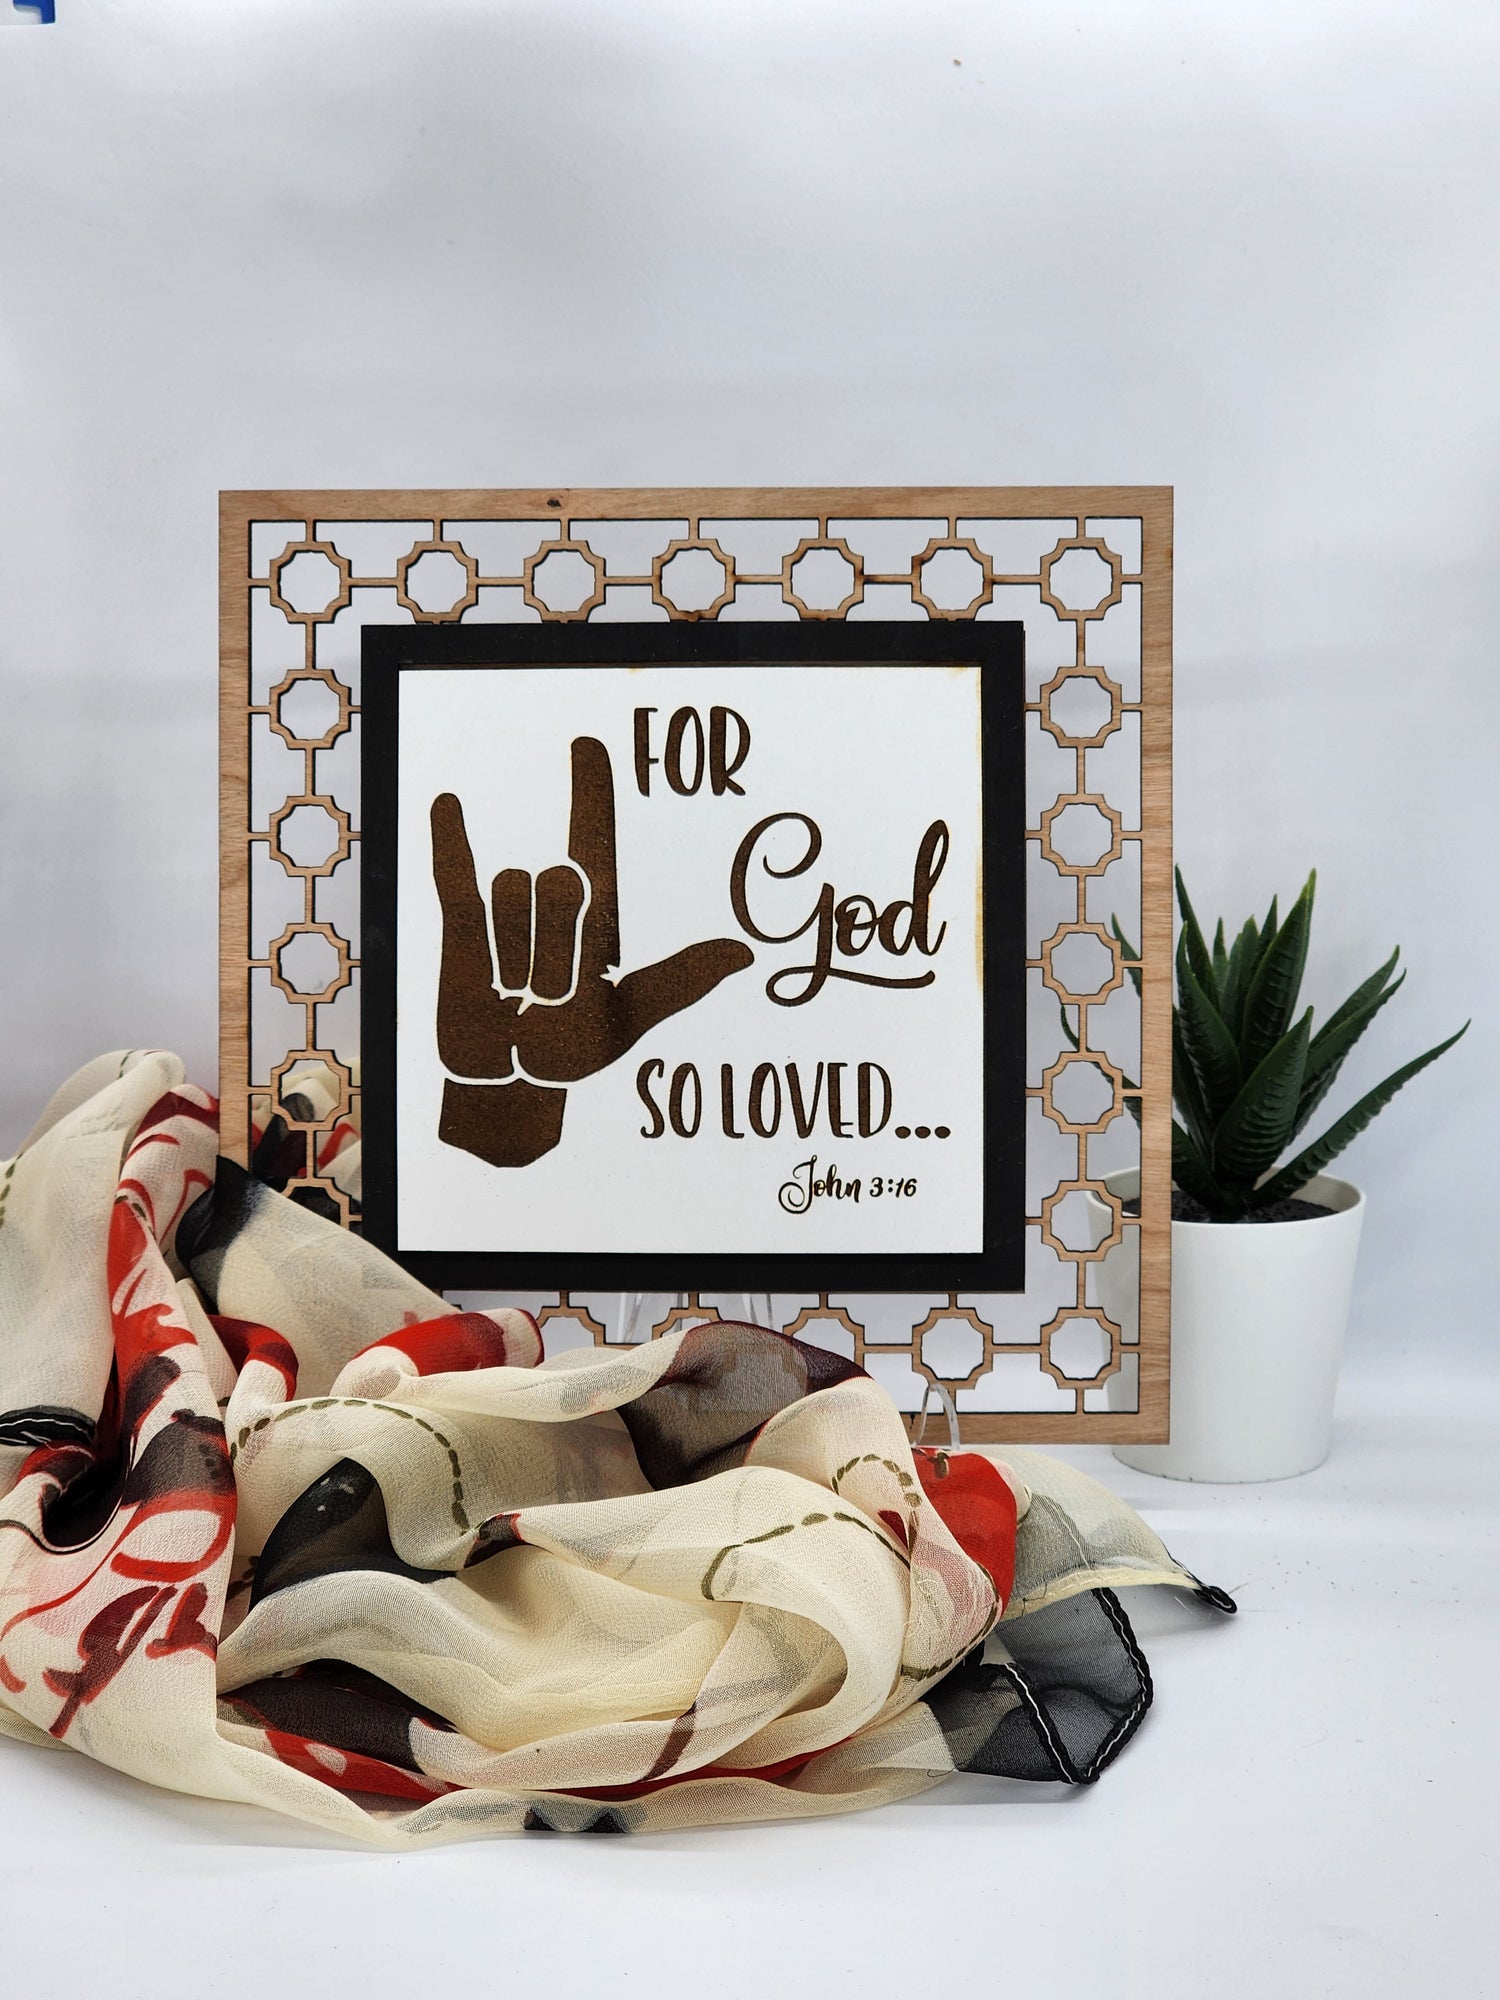 For God so Loved...John 3:16 with I Love You in sign language.  Sign measures 7 inches by 7 inches.  Verse insert is removeable so you can change it as you want. This is a wooden sign with an acrylic easel to hold the sign.